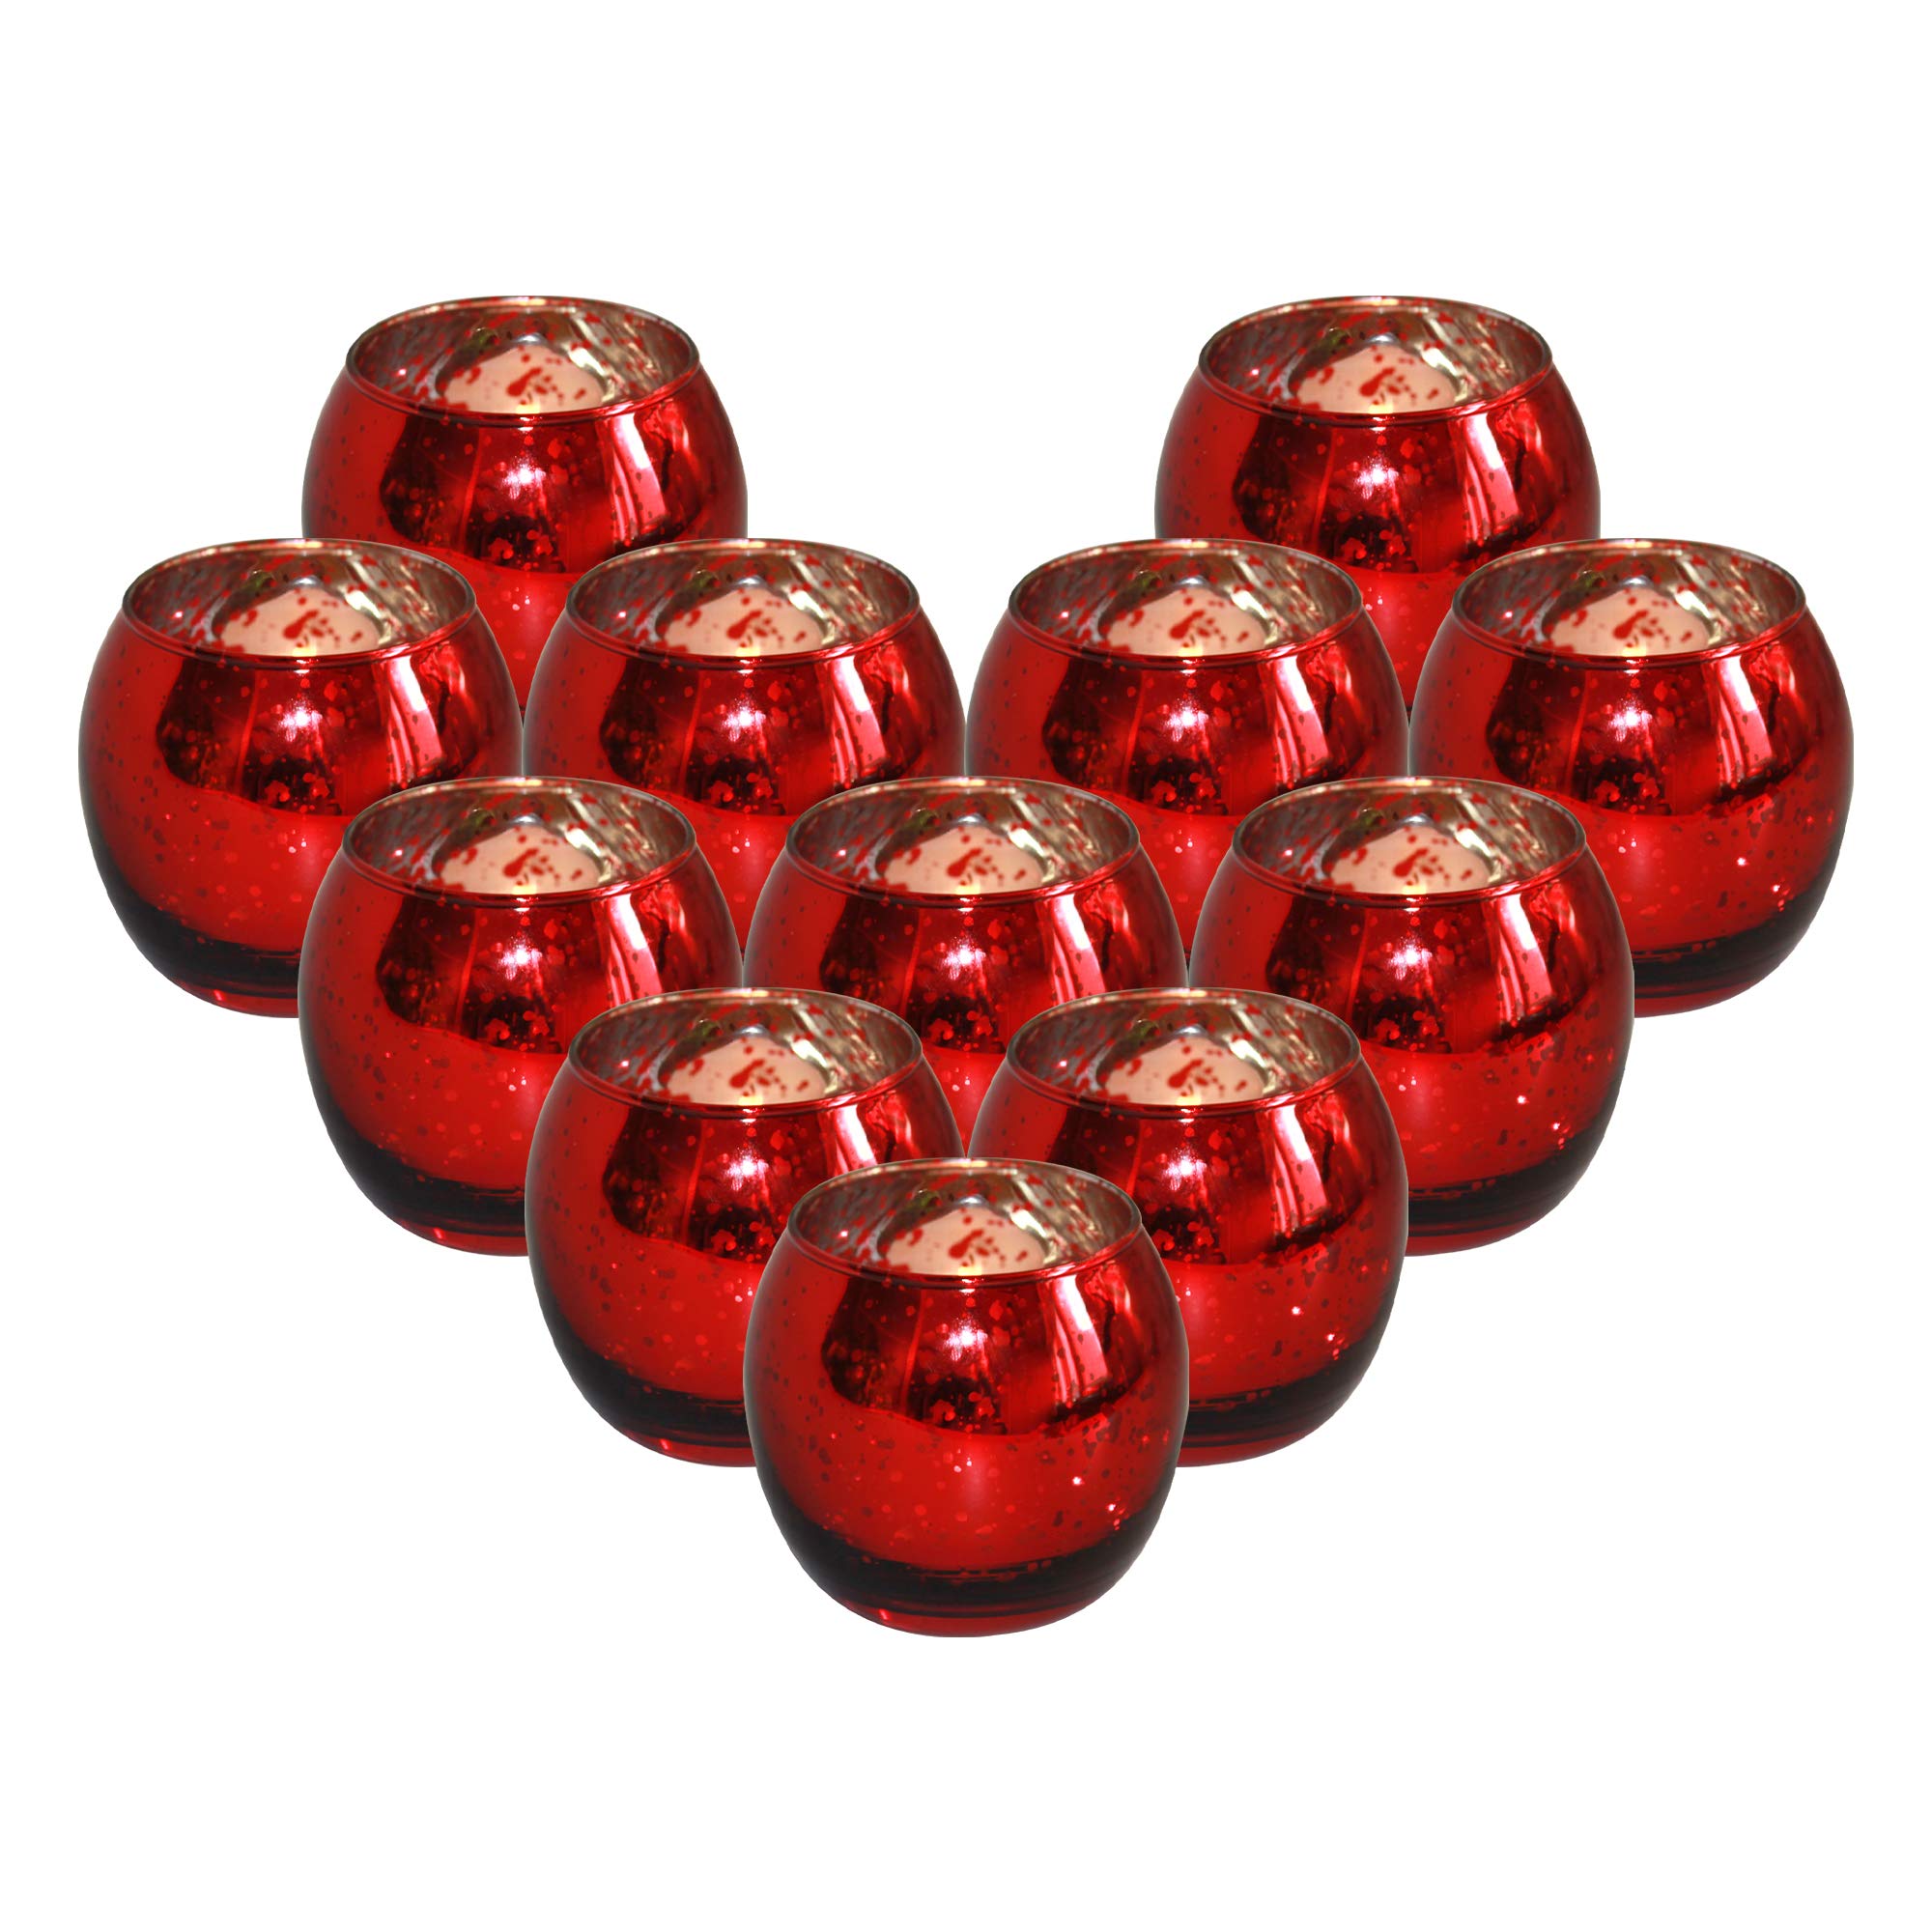 12 Pcs Red Bowl Votive Candle Holders Bulk, Speckled Mercury Glass Tealight Candle Holder Perfect Centerpieces for Home Table Wedding Decor Party D...